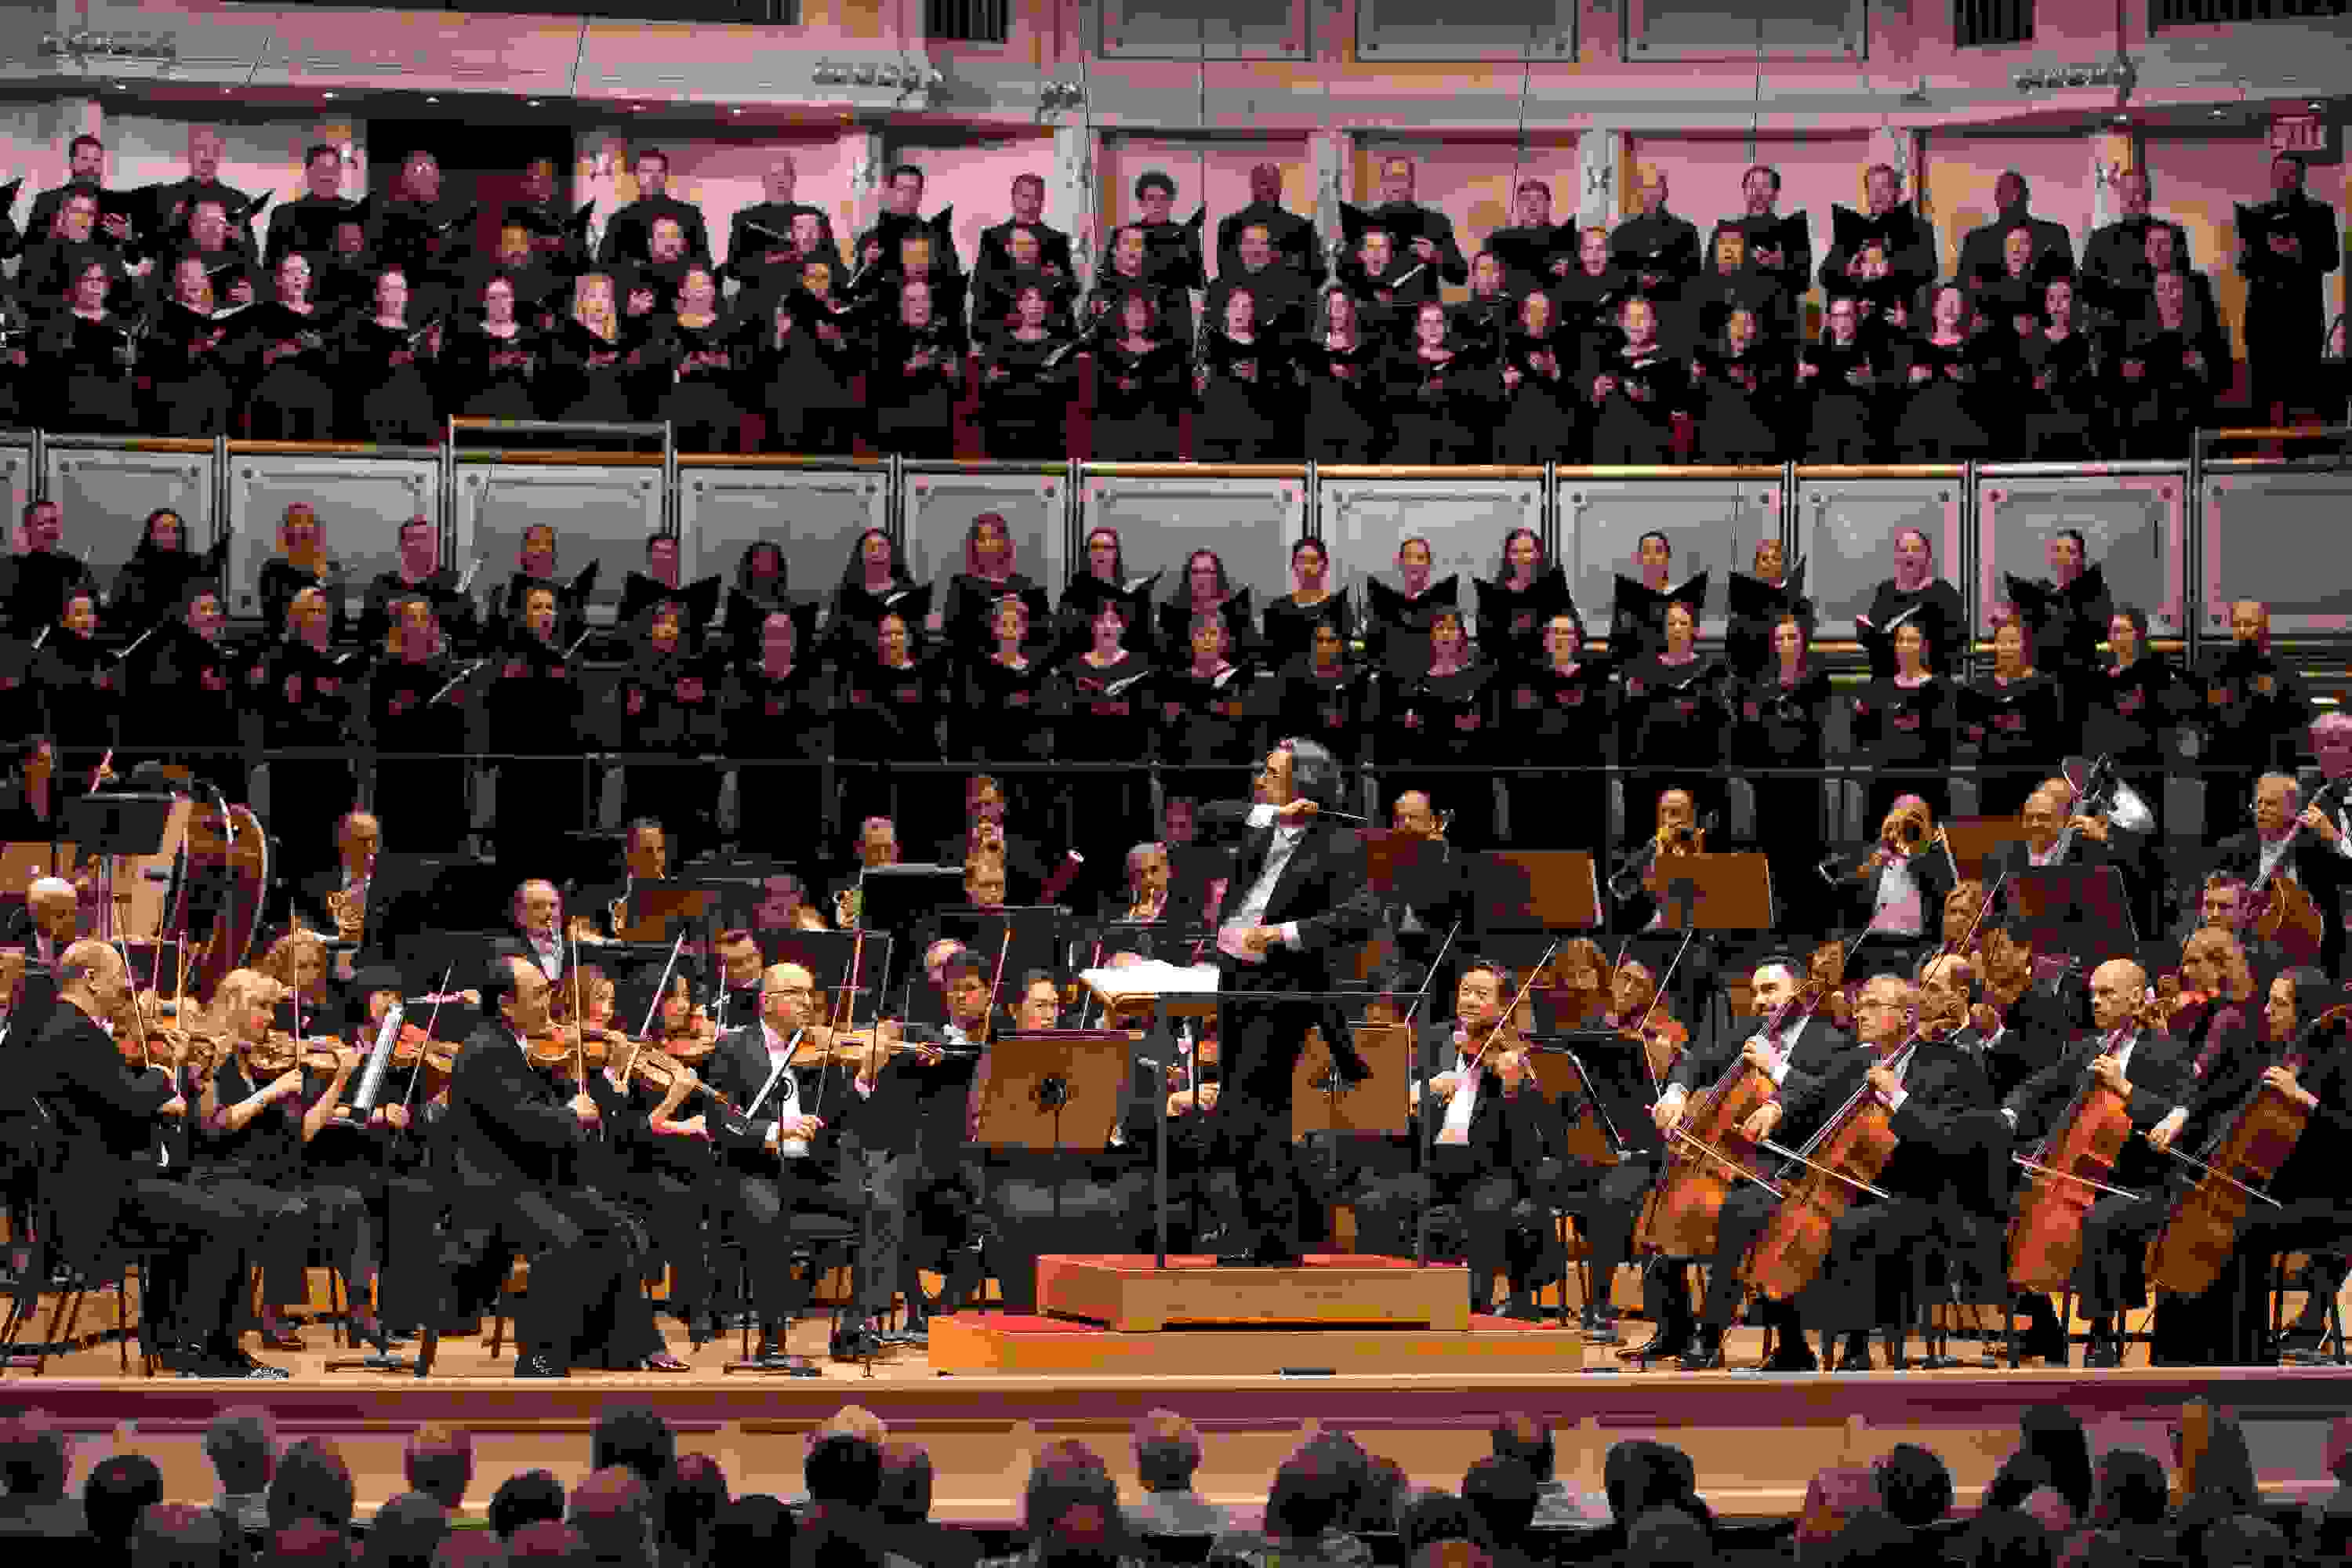 Riccardo Muti with the Chicago Symphony Orchestra and Chorus